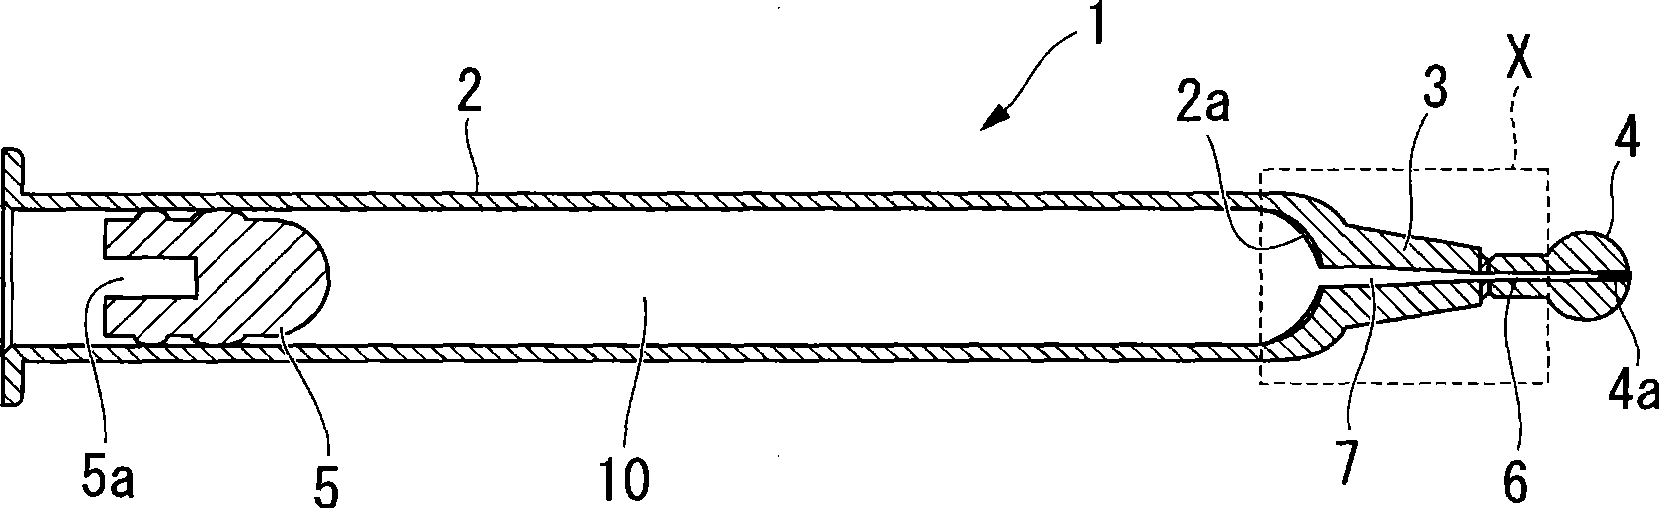 An ampoule usable as a syringe and a syringe unit comprising the ampoule